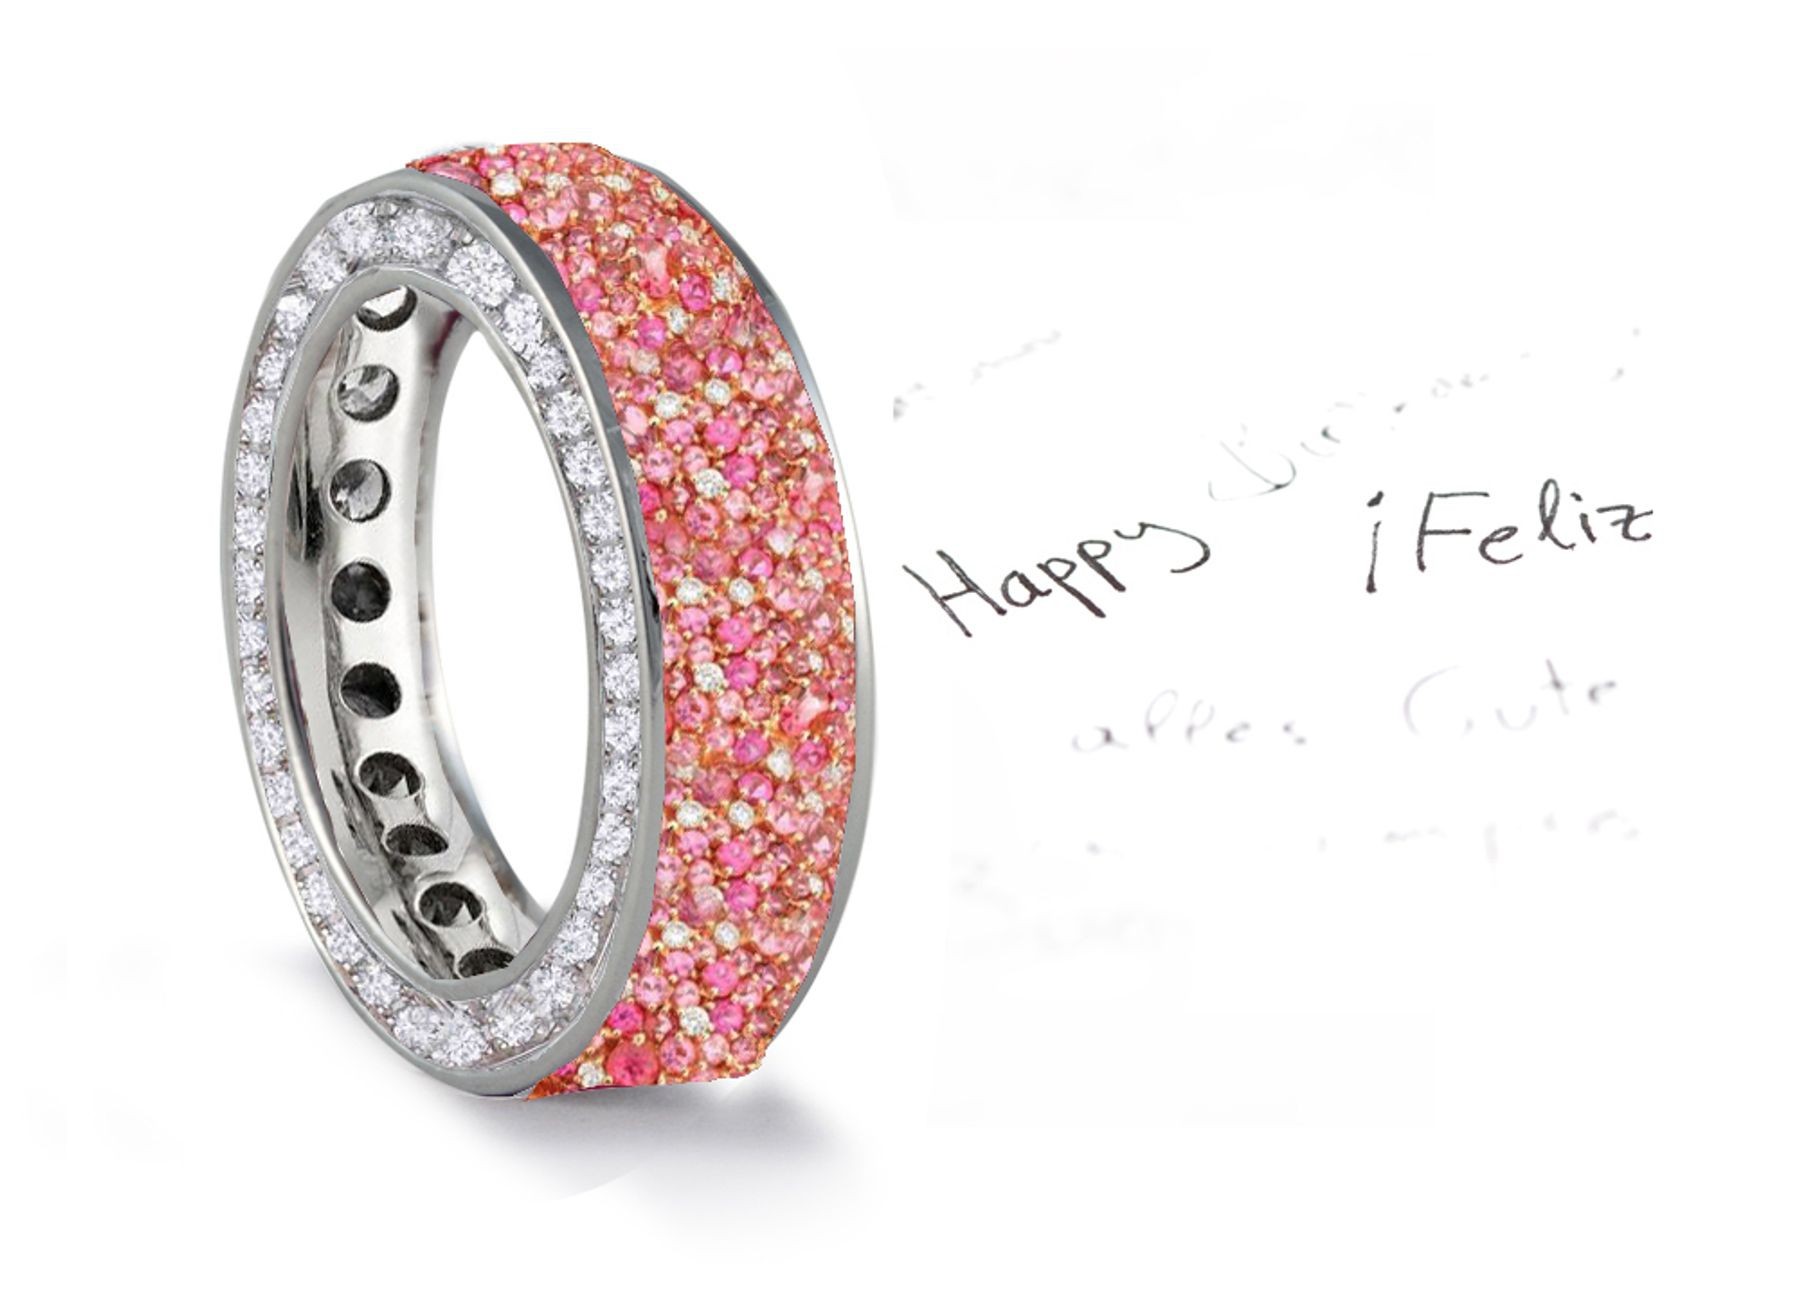 Made to Order French pave Set Brilliant Cut Round Diamonds & Pink Sapphires Eternity Rings & Bands